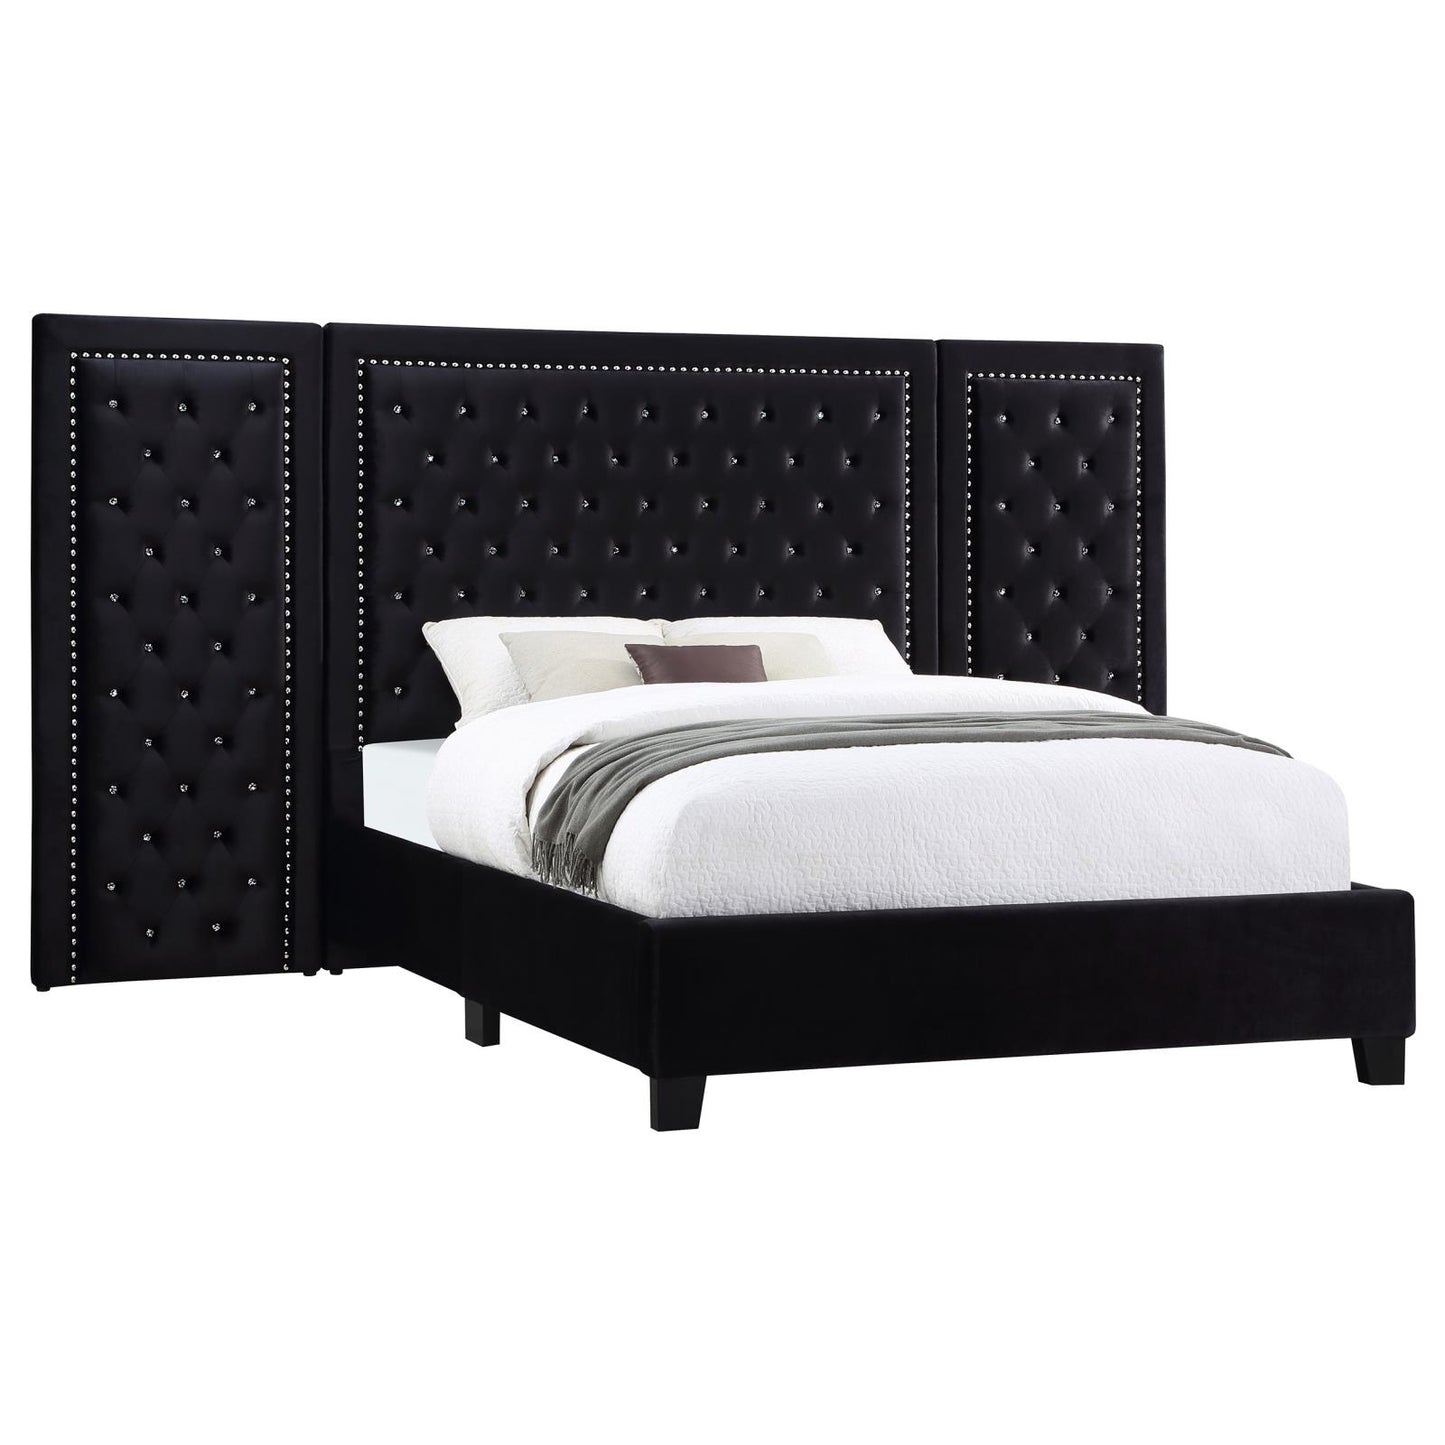 Hailey Upholstered Platform Eastern King Bed with Wall Panel Black